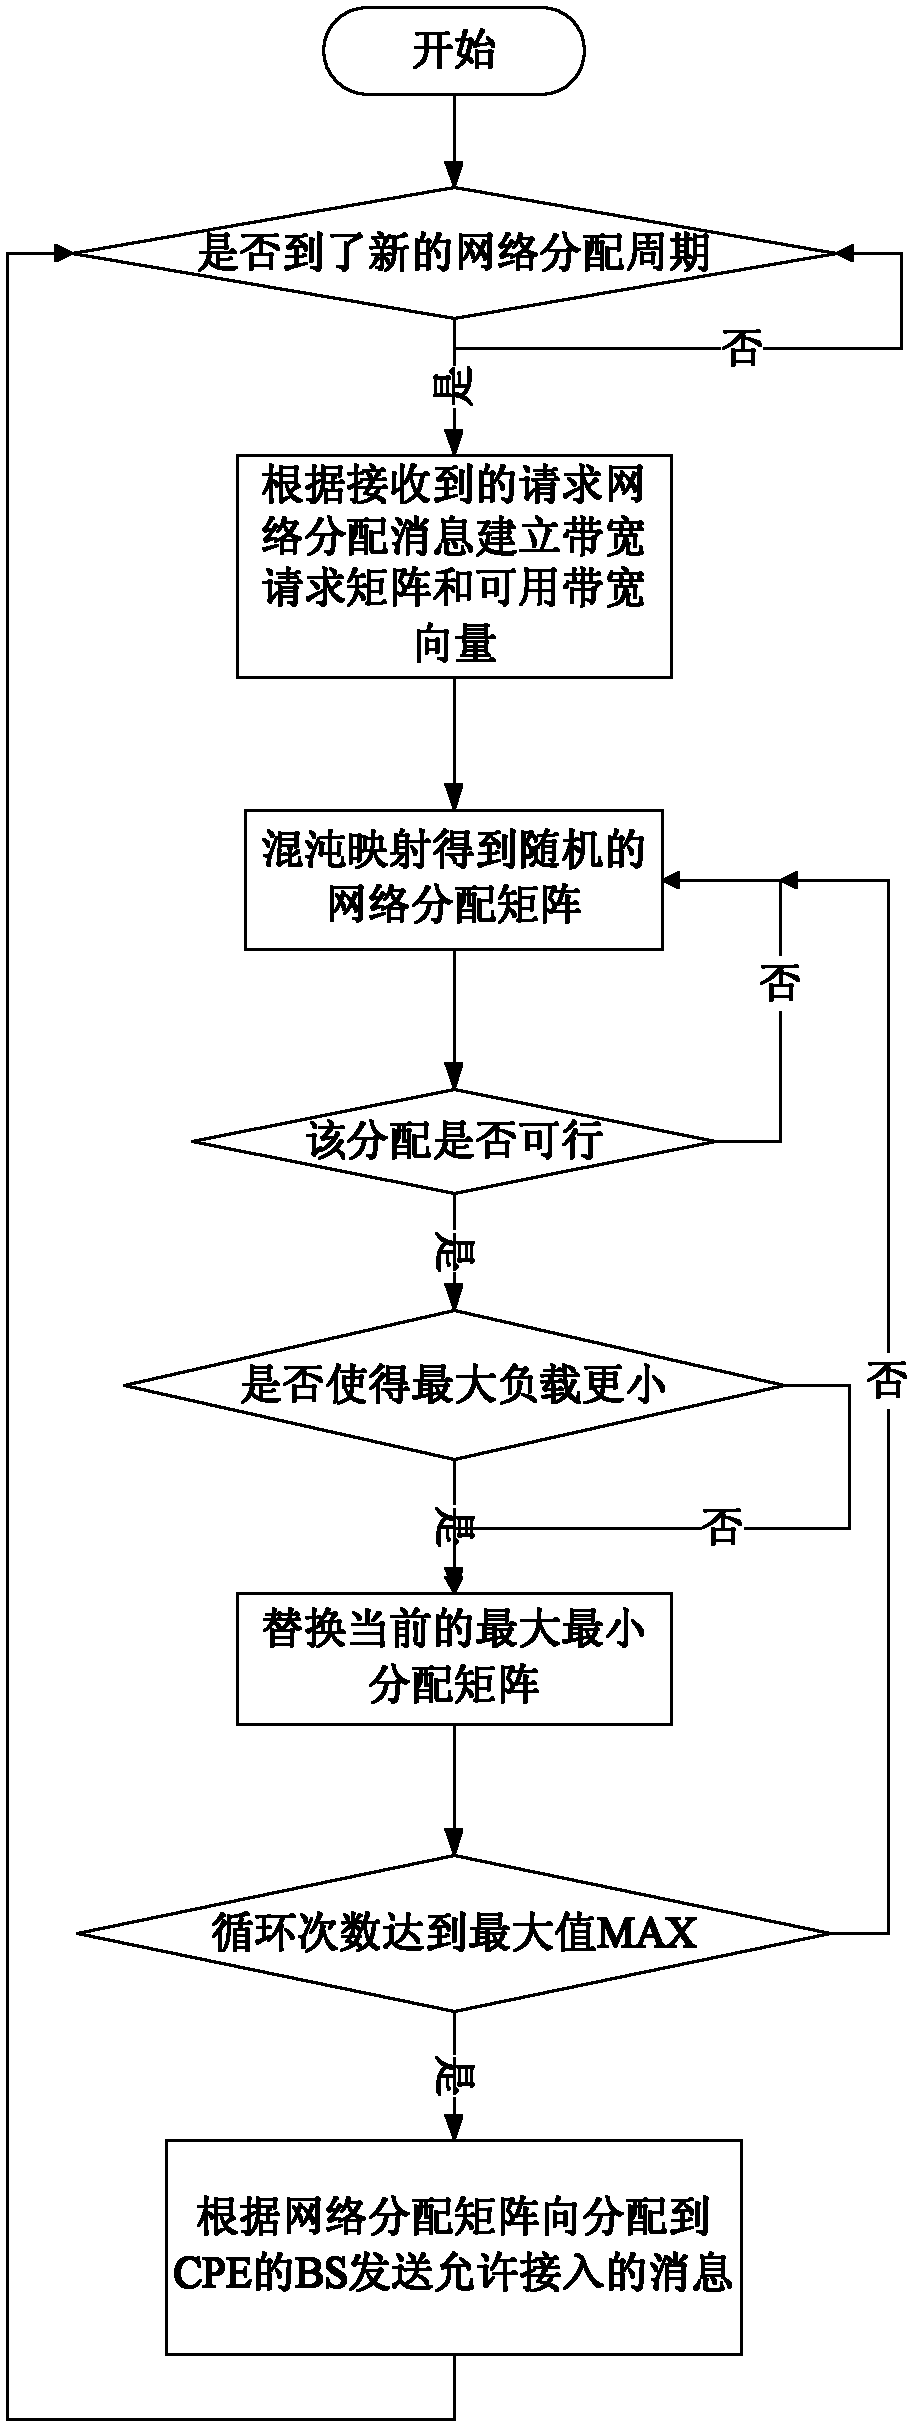 Network switching side control method for terminal group access network based on cognitive radio